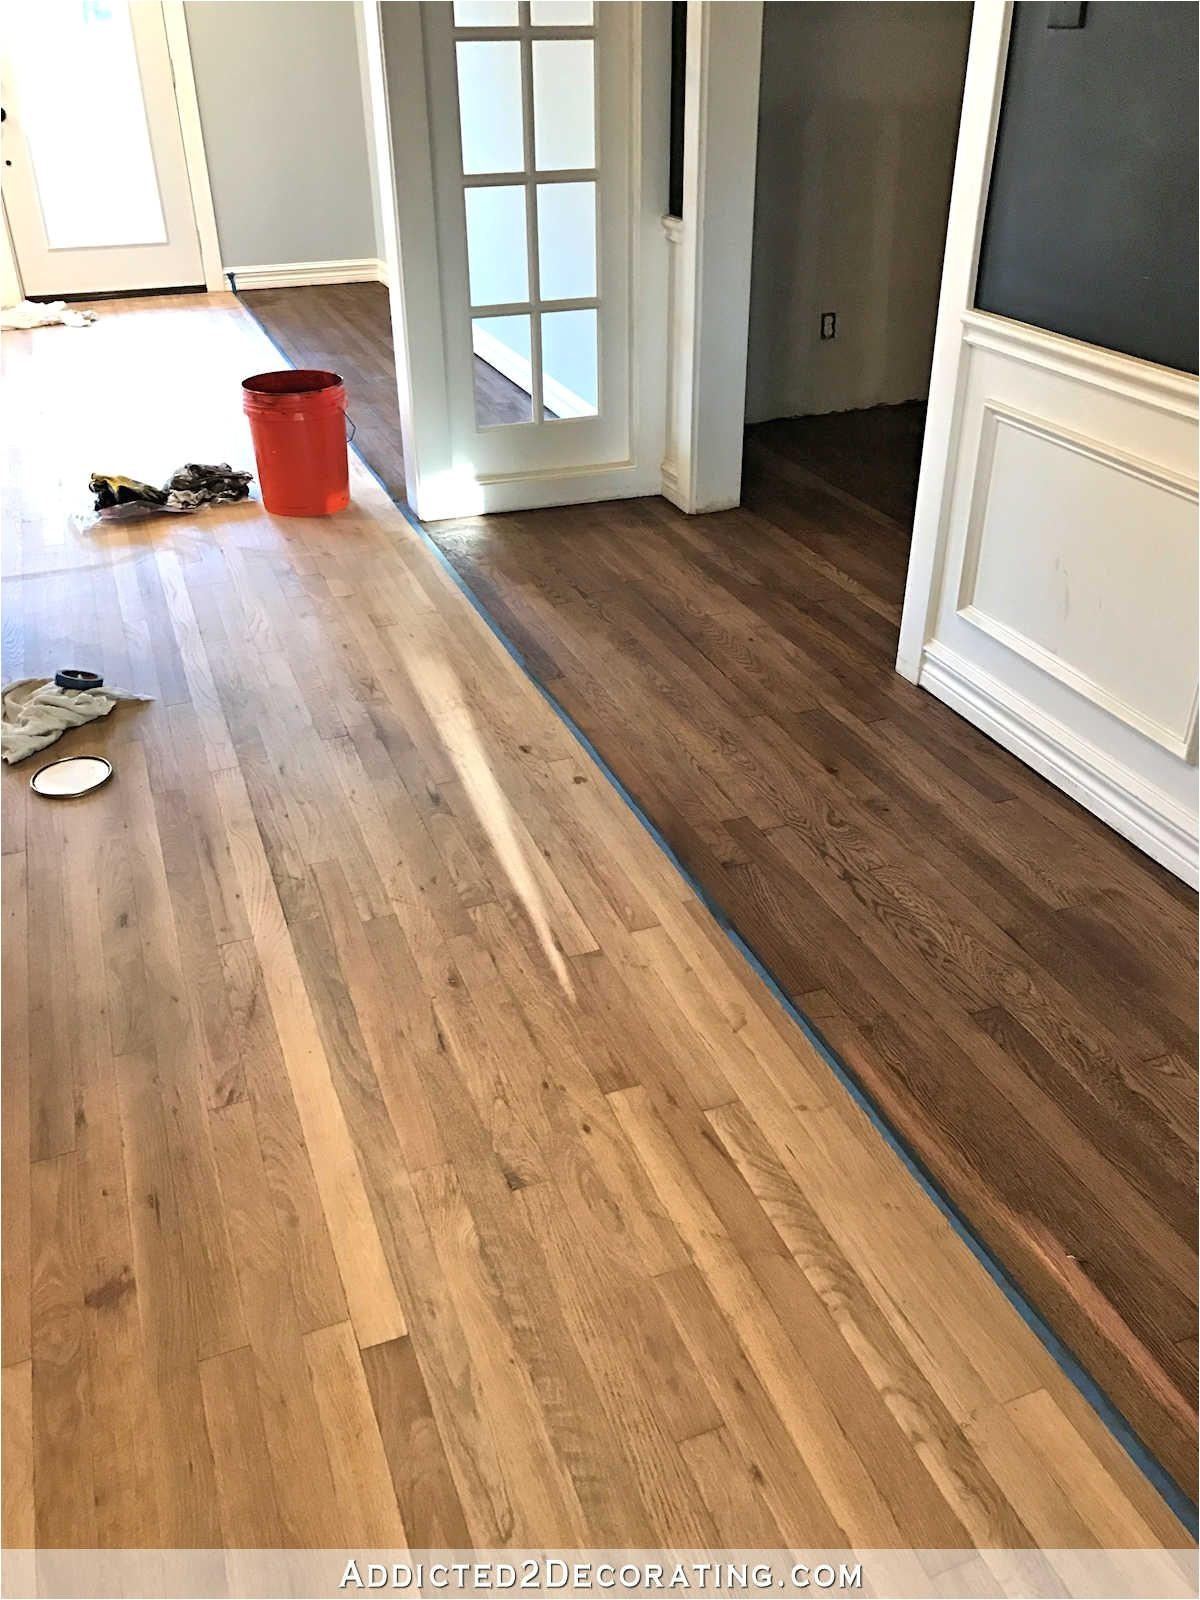 26 Lovely How to Install Quarter Round On Hardwood Floors 2024 free download how to install quarter round on hardwood floors of 27 elegant laminate flooring made in usa image flooring design ideas regarding best laminate flooring made in usa 40 can you stain laminate